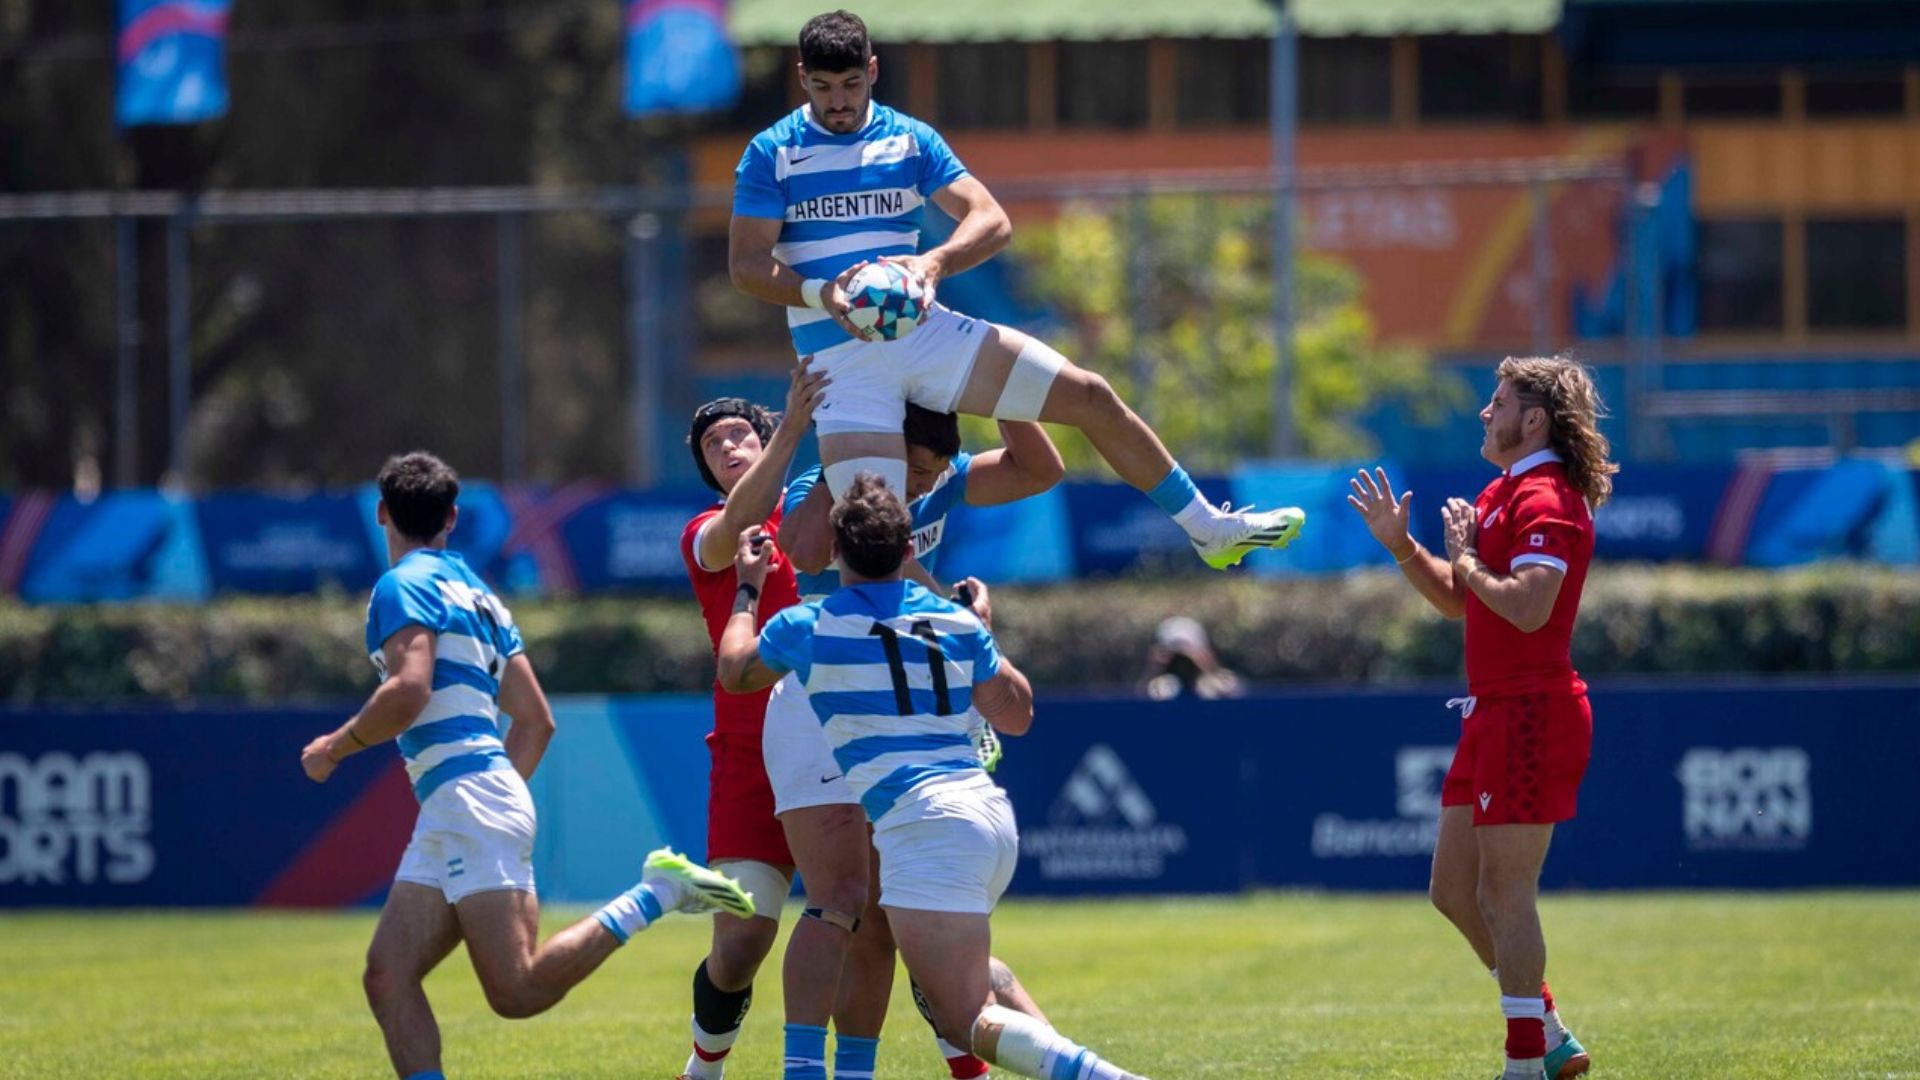 Argentina Meets Expectations and Claims Gold in Male's Rugby 7